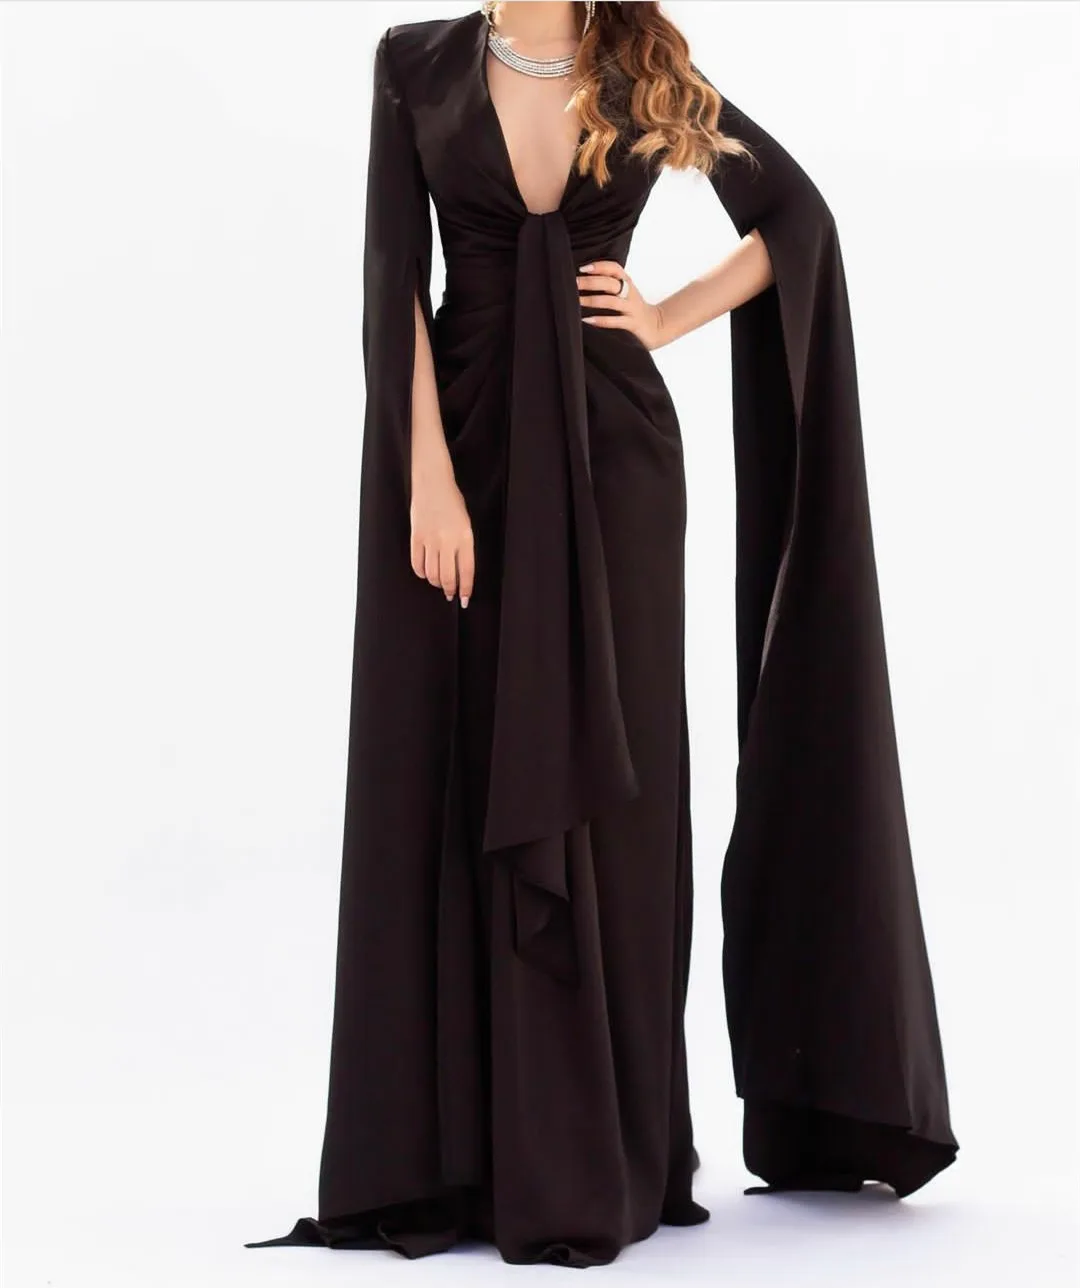 

Sexy Long V-Neck Evening Dresses With Cape Sheath Floor Length فساتين السهرة Robes de soirée Prom Dress Formal Women Party Gowns